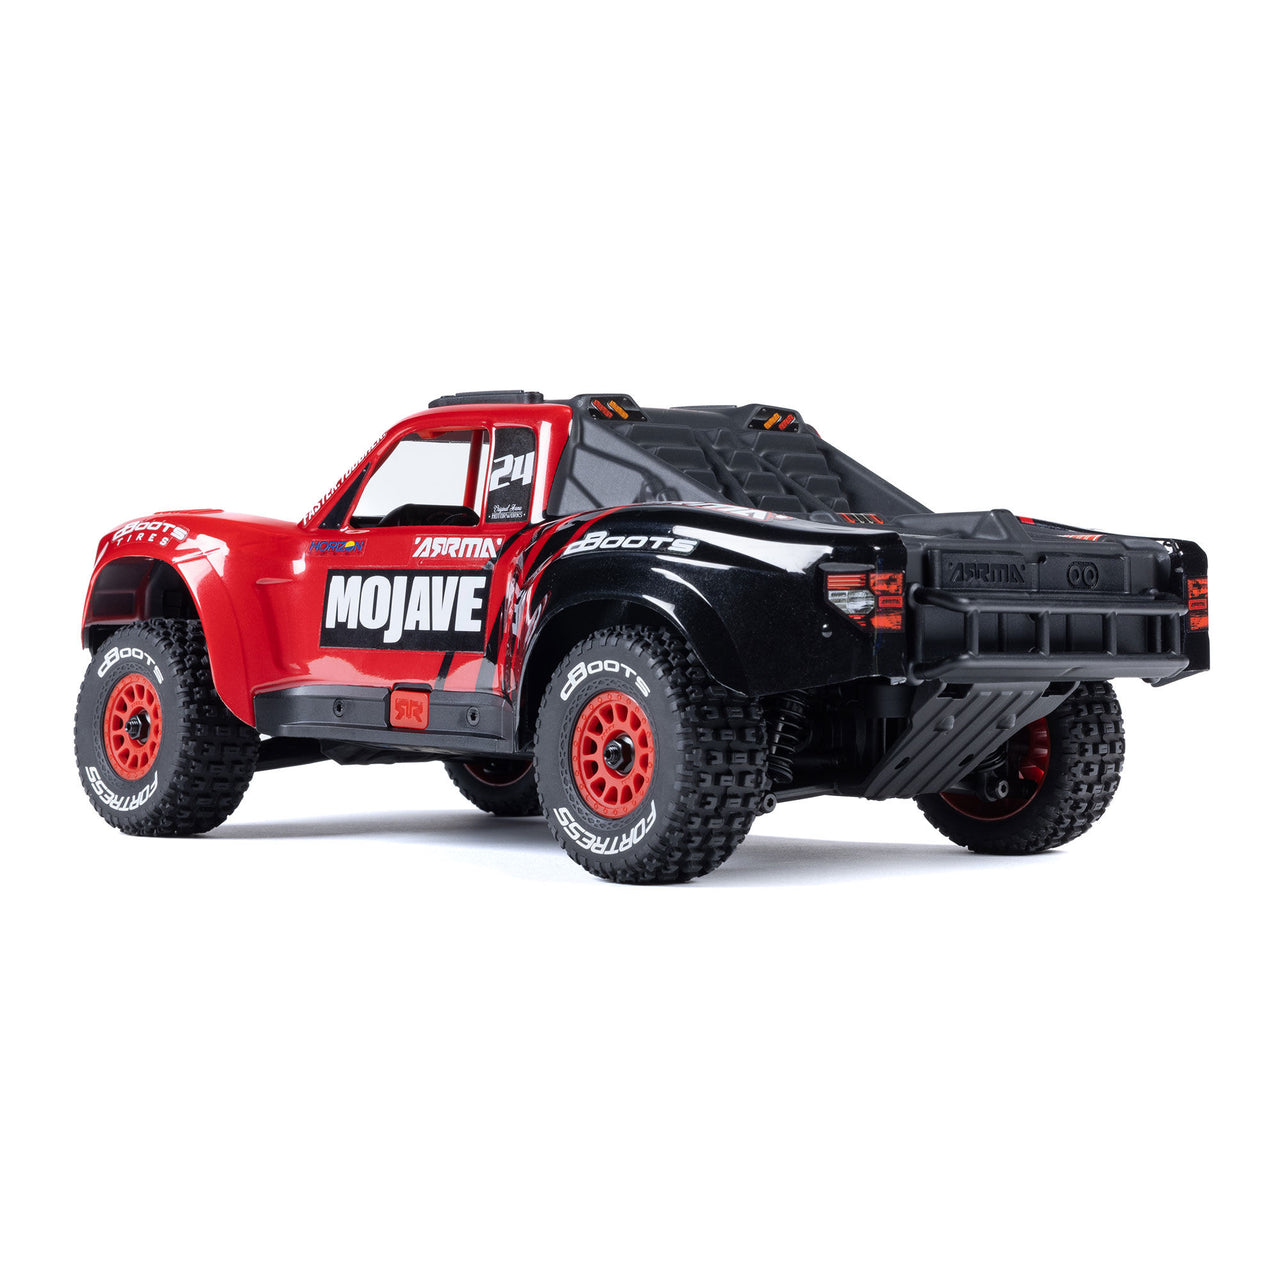 ARA2104T1 MOJAVE GROM MEGA 380 Brushed 4X4 Small Scale Desert Truck RTR with Battery & Charger, Red/Black